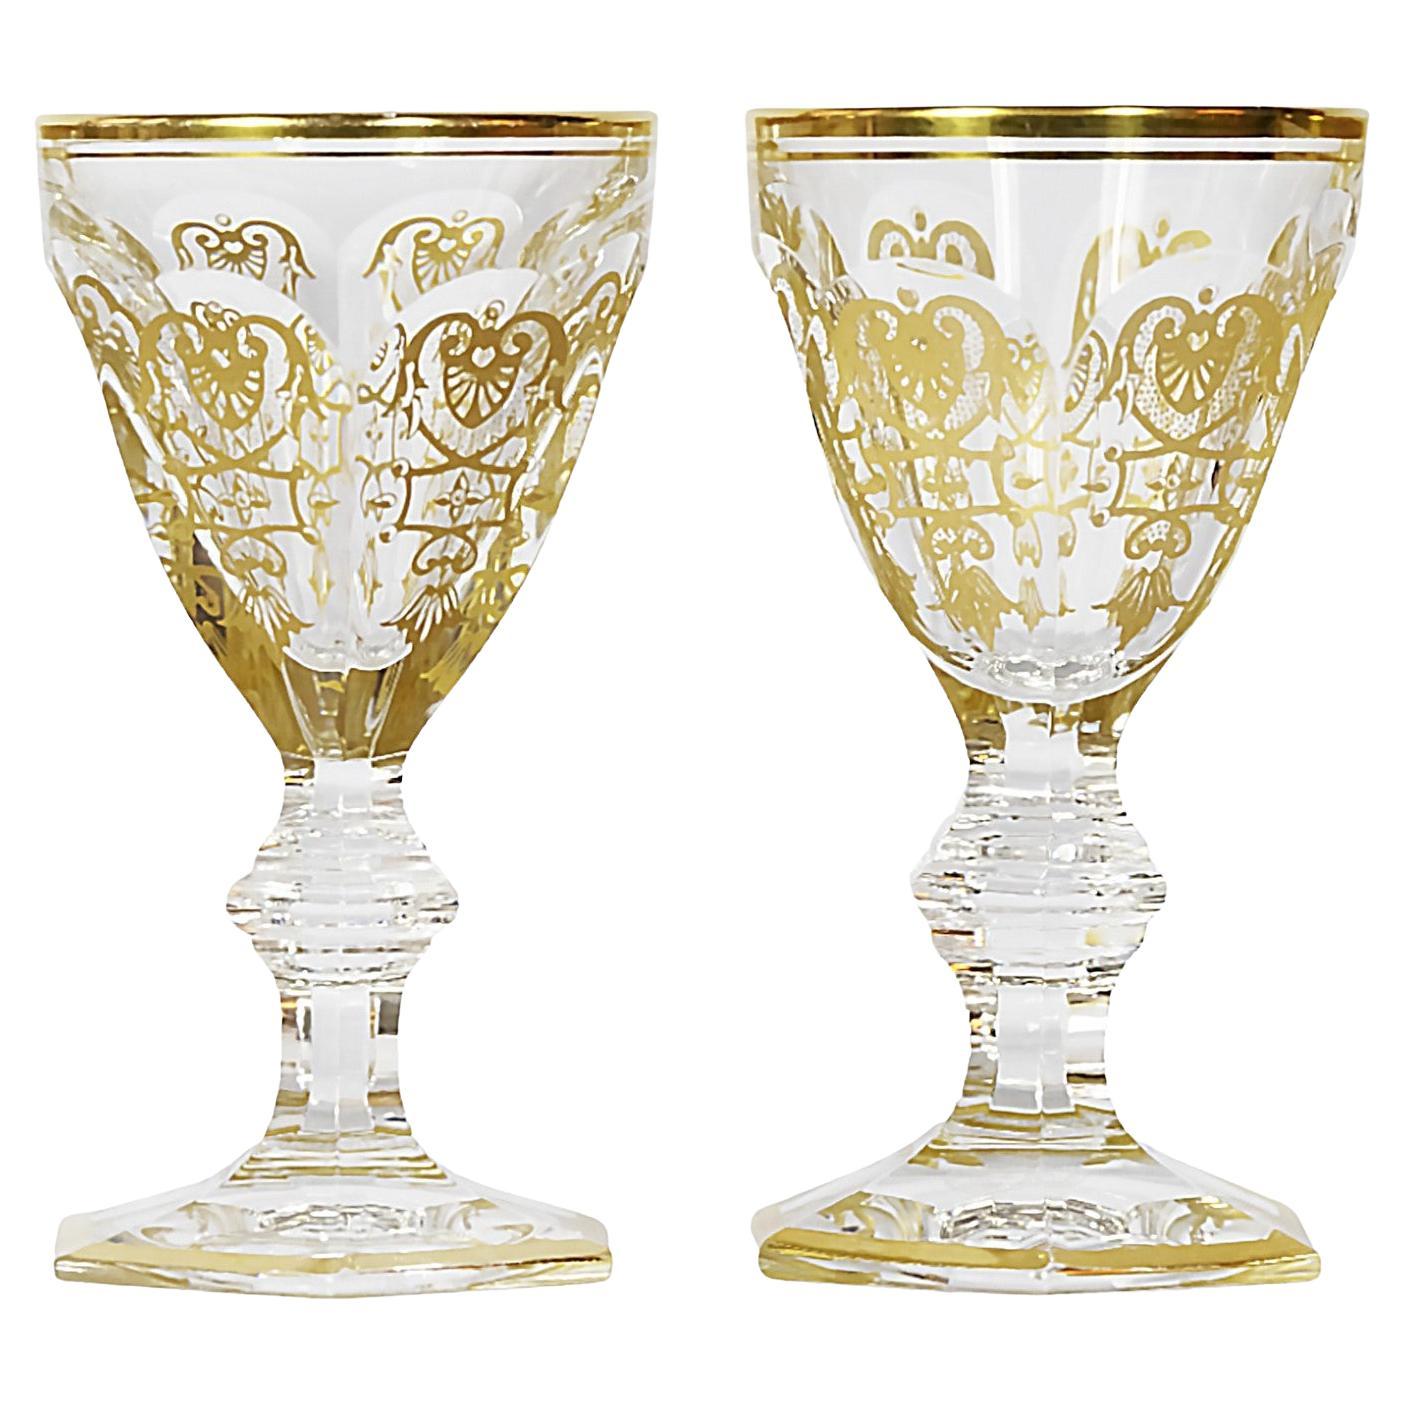 Is Baccarat glass or crystal?